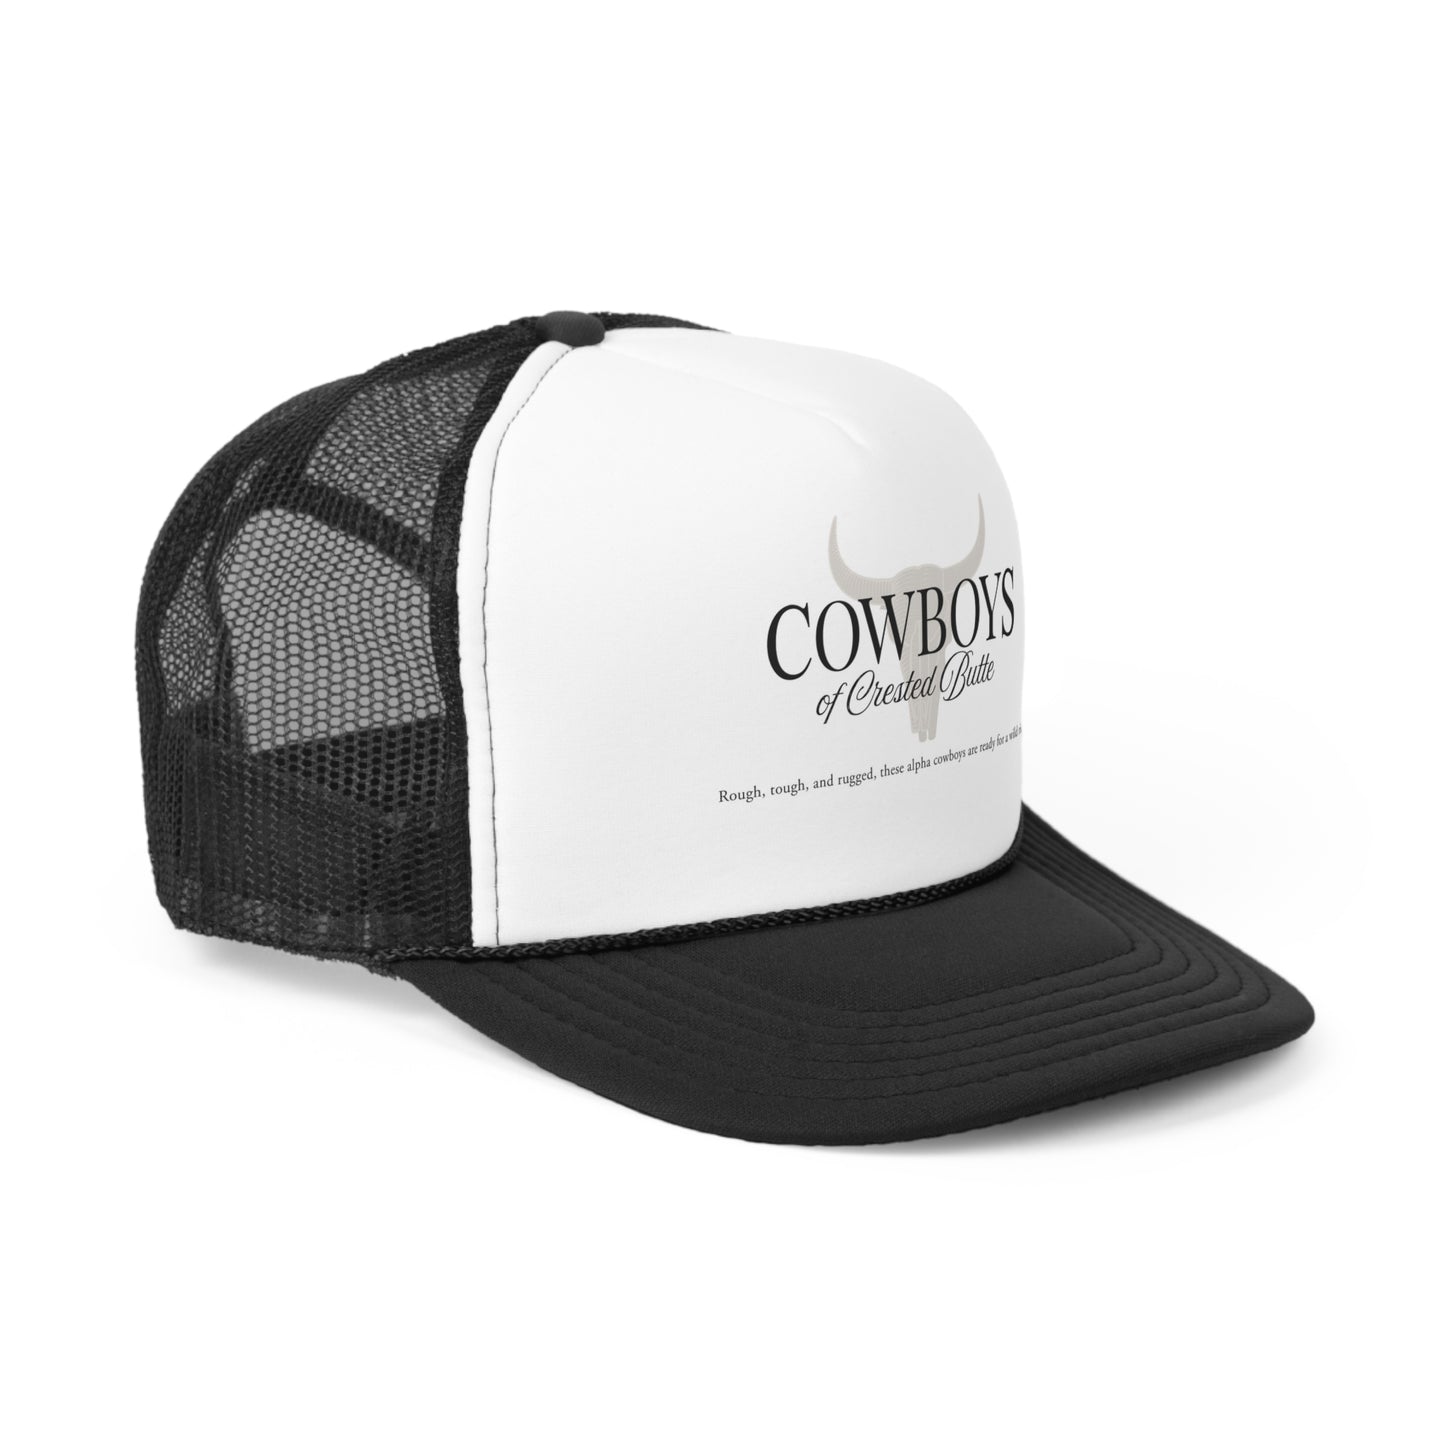 Cowboys of Crested Butte Trucker Caps